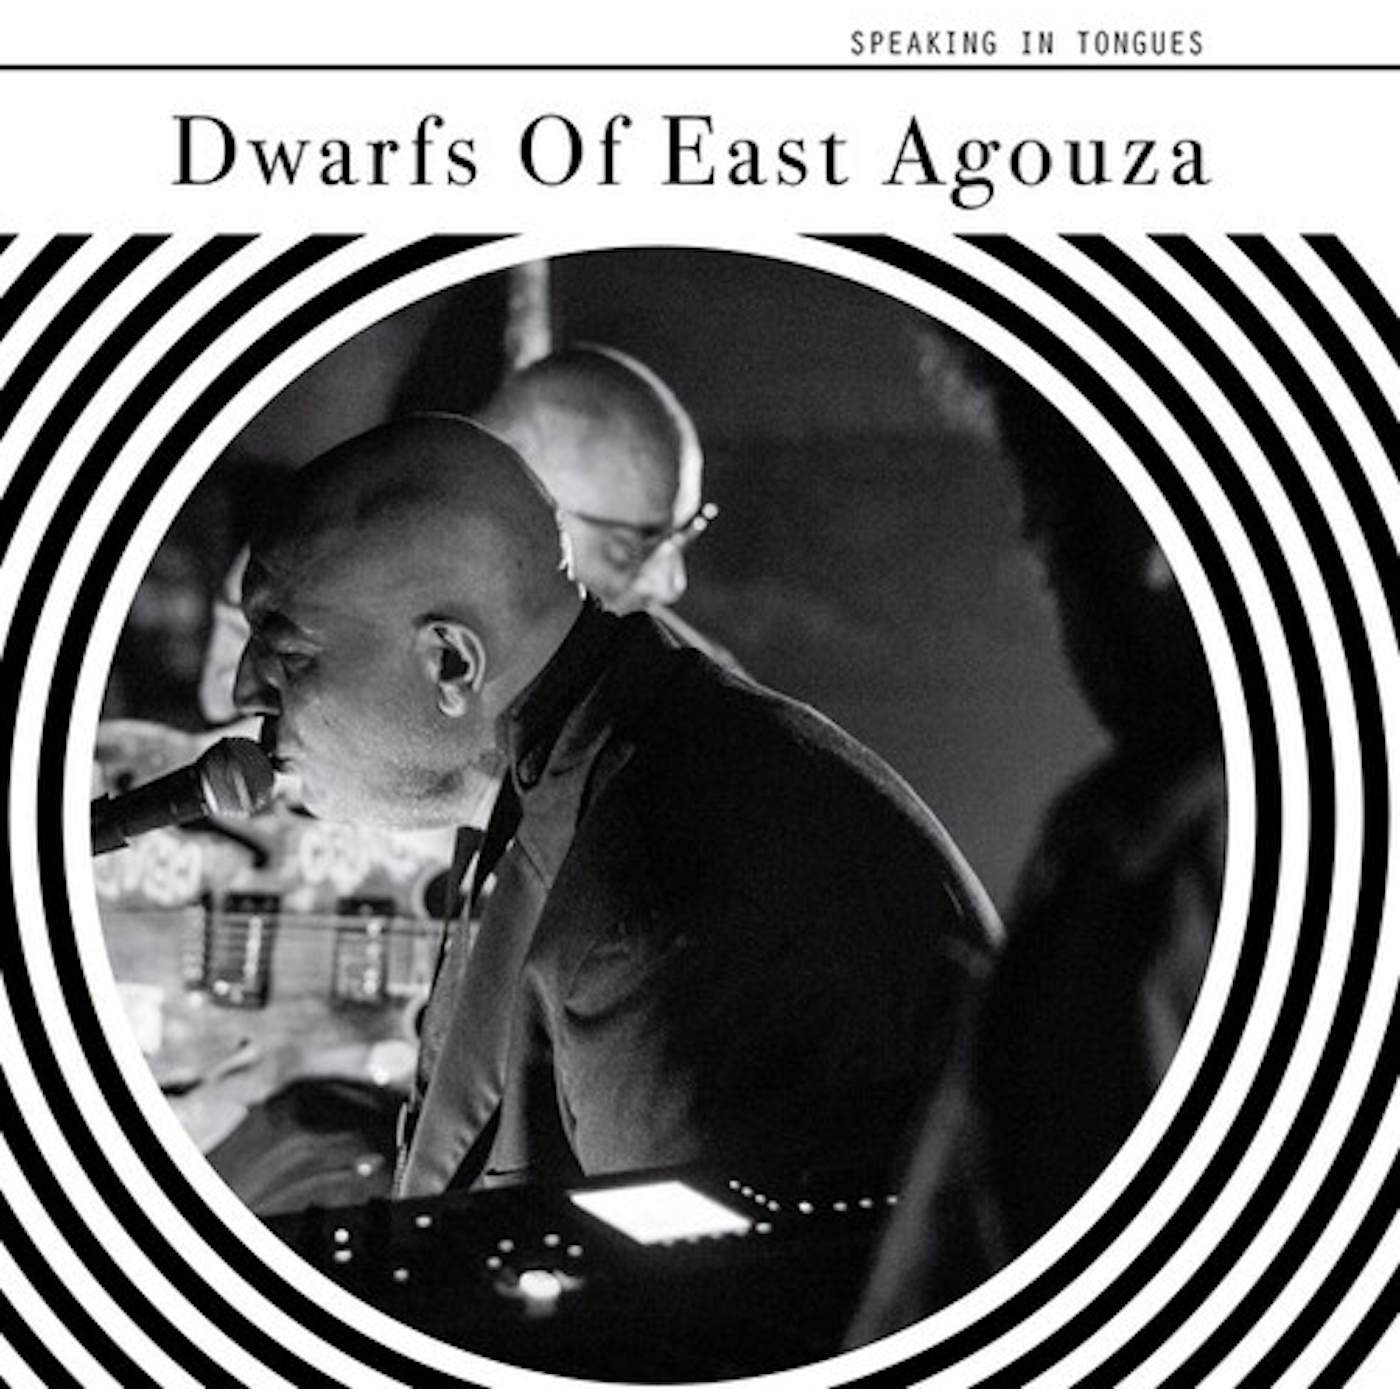 The Dwarfs of East Agouza SPEAKING IN TONGUES Vinyl Record